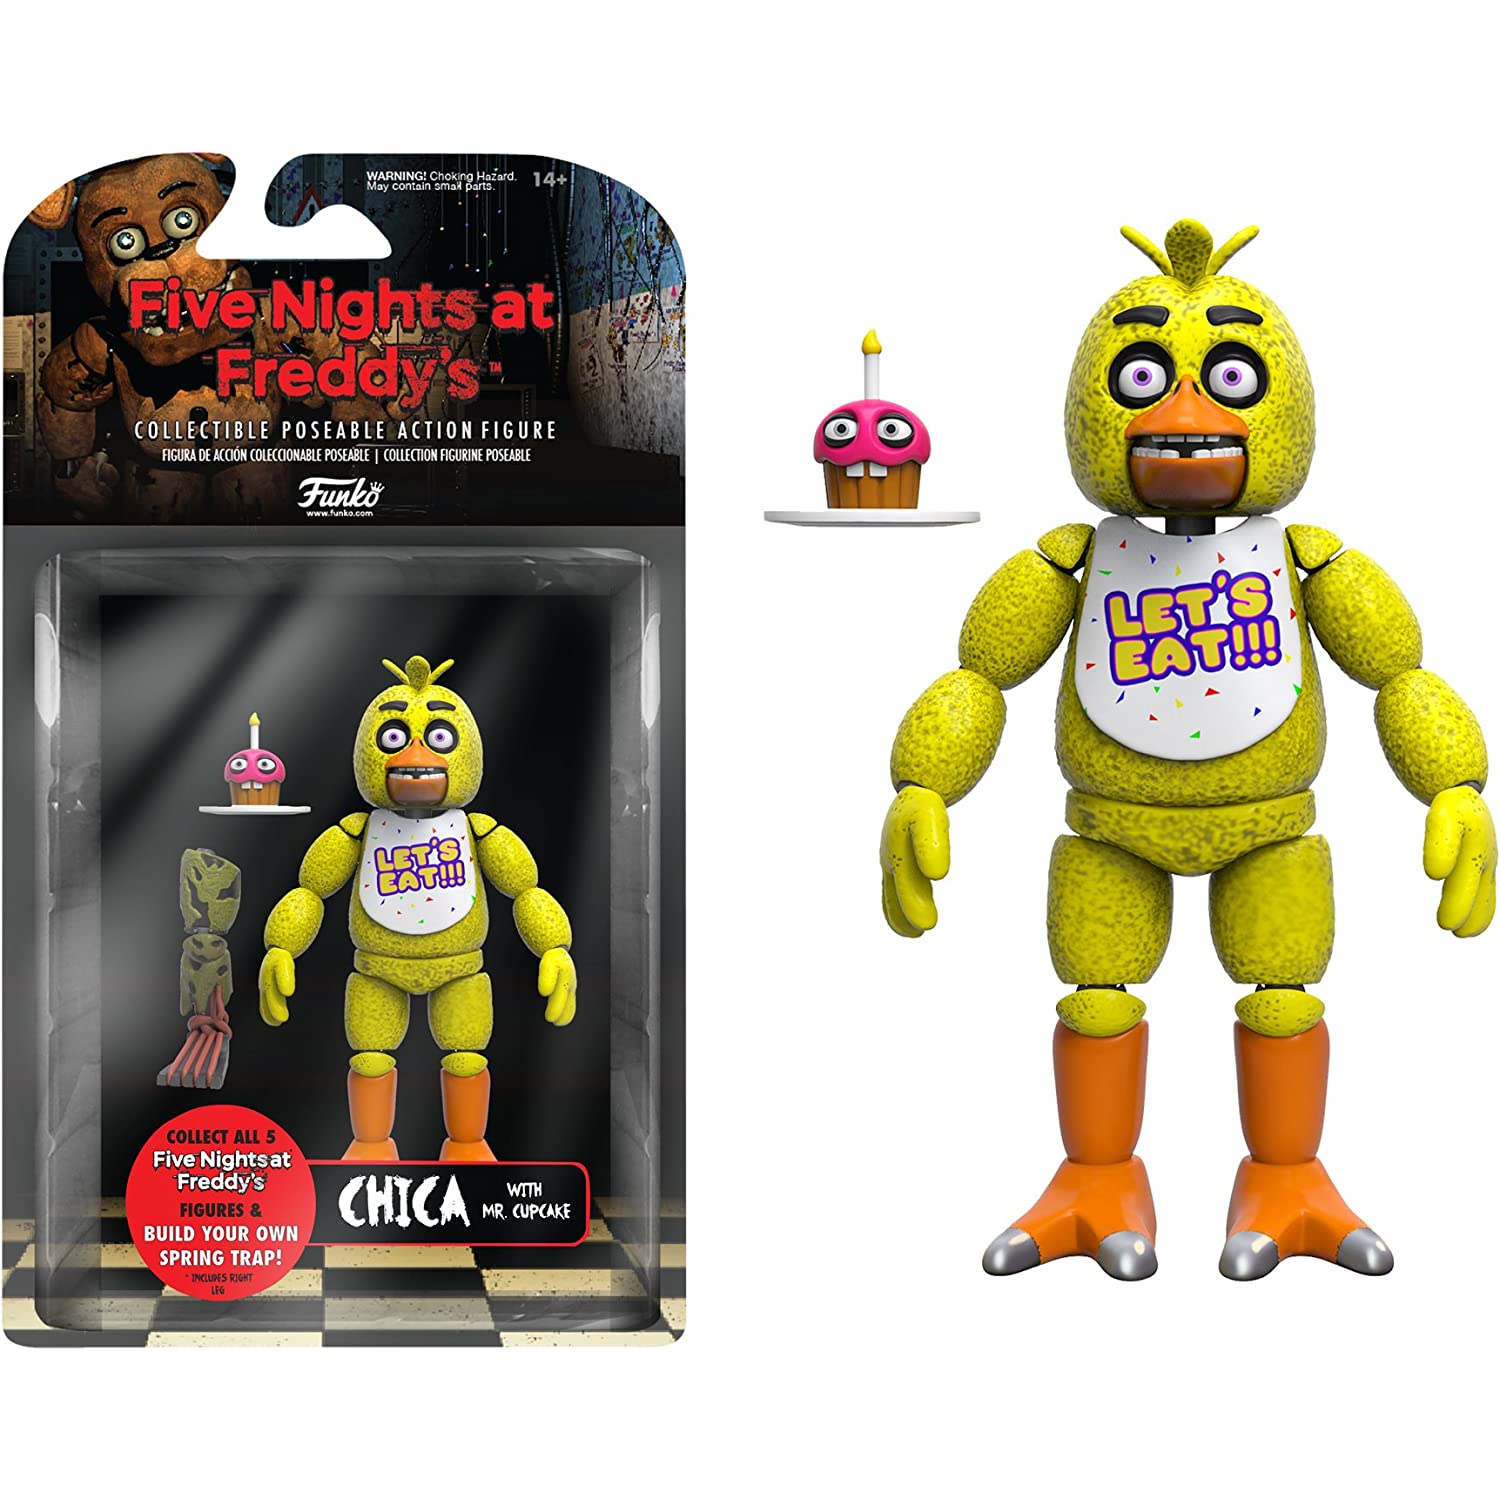 five nights at Freddy's Articulated Freddy Frostbear Action Figure, 5 Inch